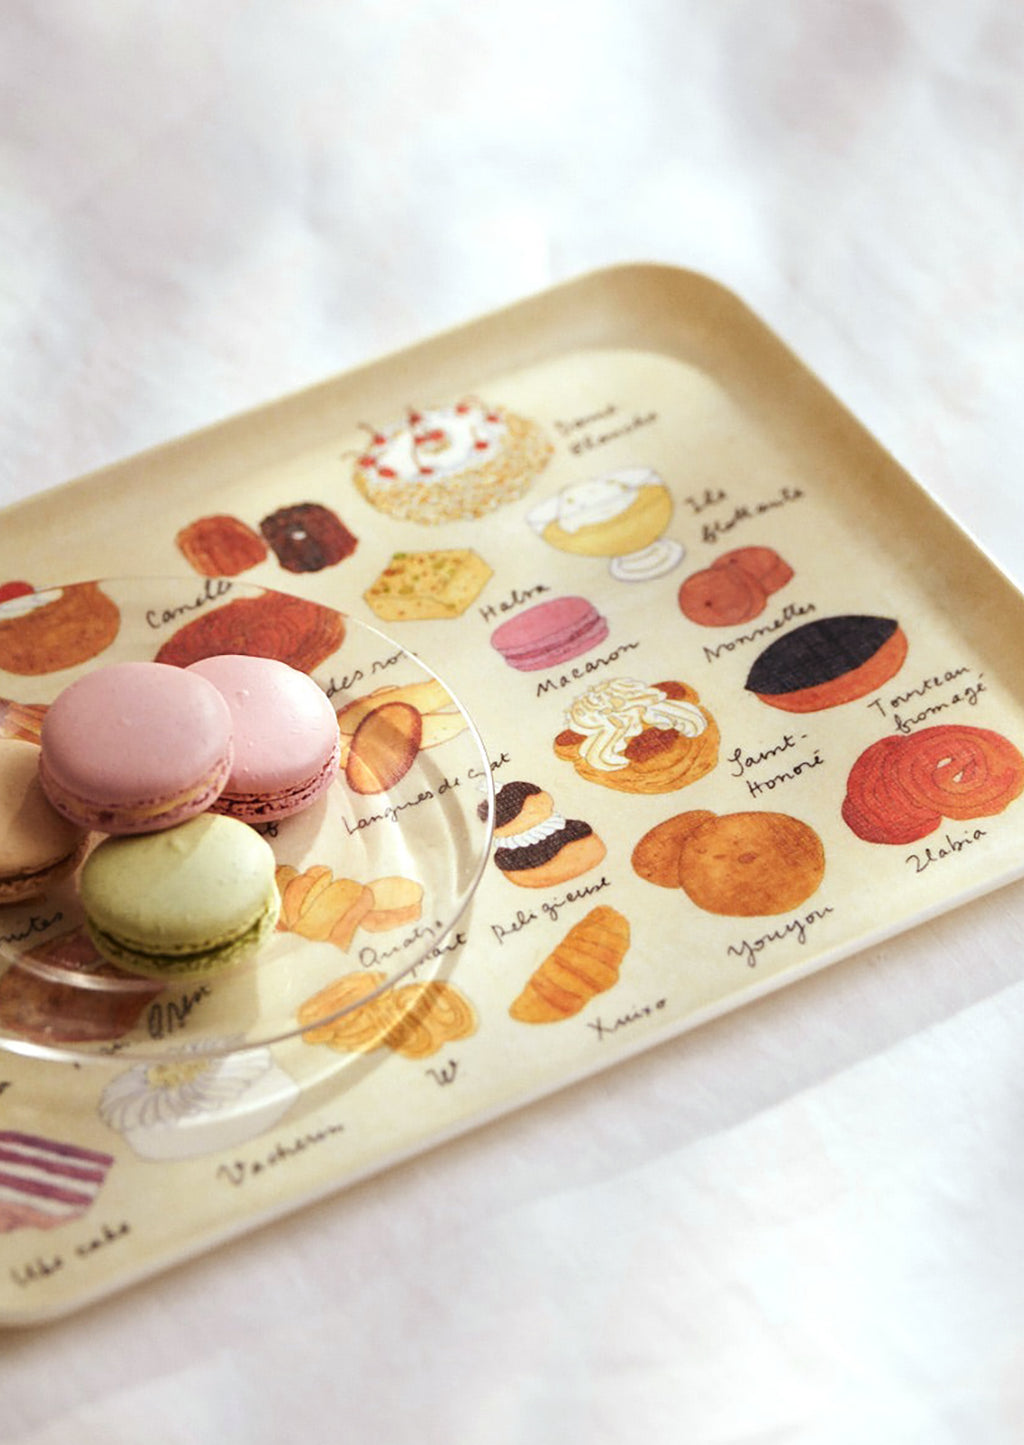 2: A printed tray with pastries pattern.